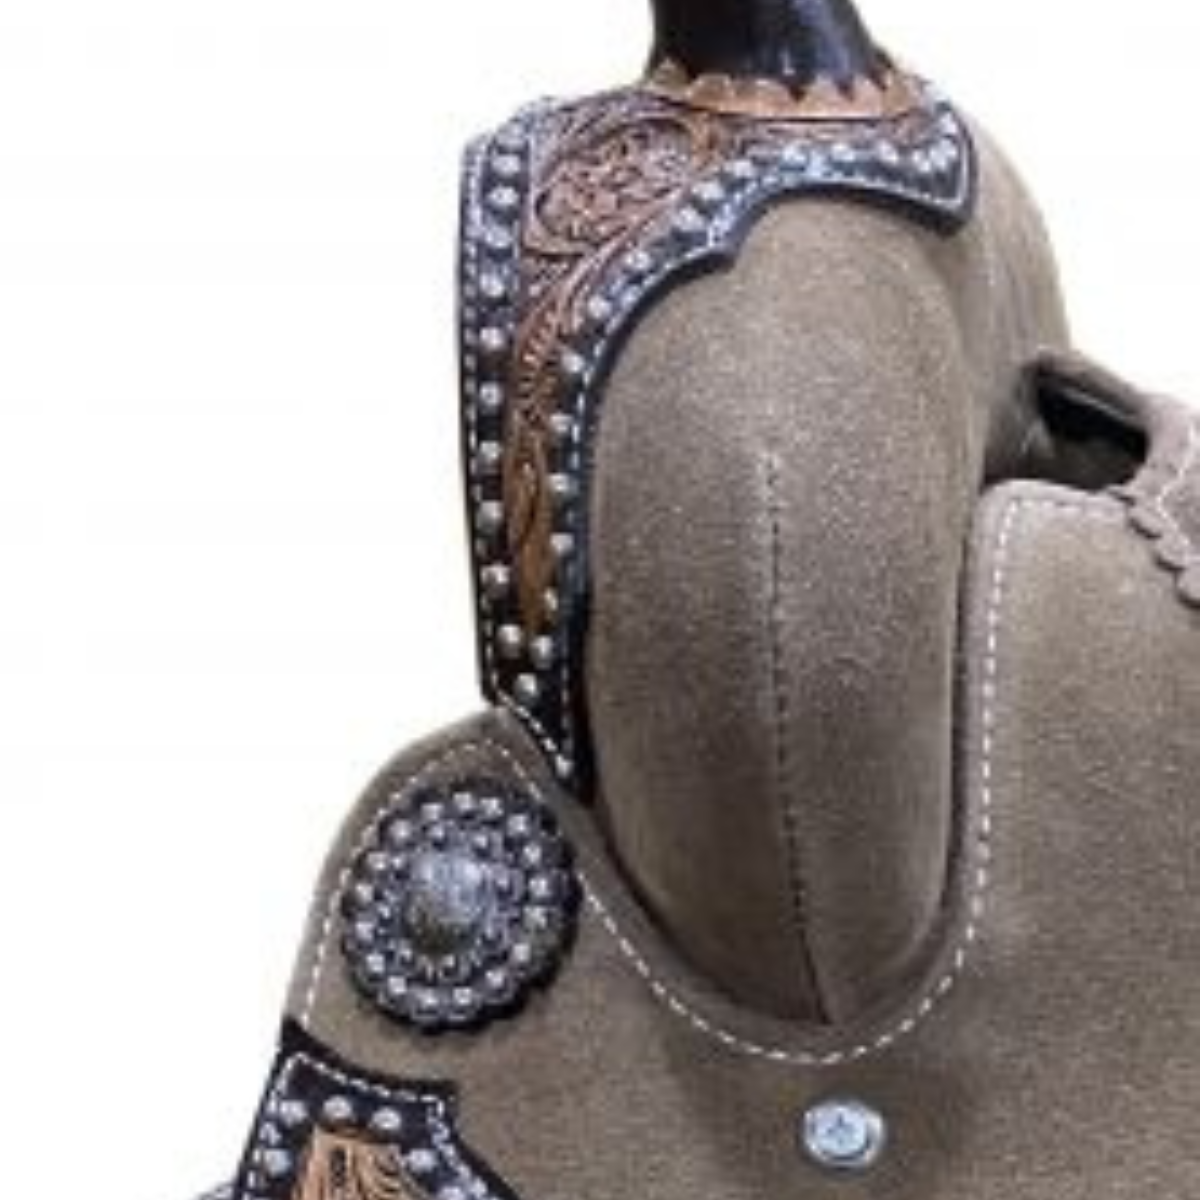 12" DOUBLE T ROUGH OUT BARREL STYLE SADDLE WITH CHEETAH PRINTED INLAY - Double T Saddles